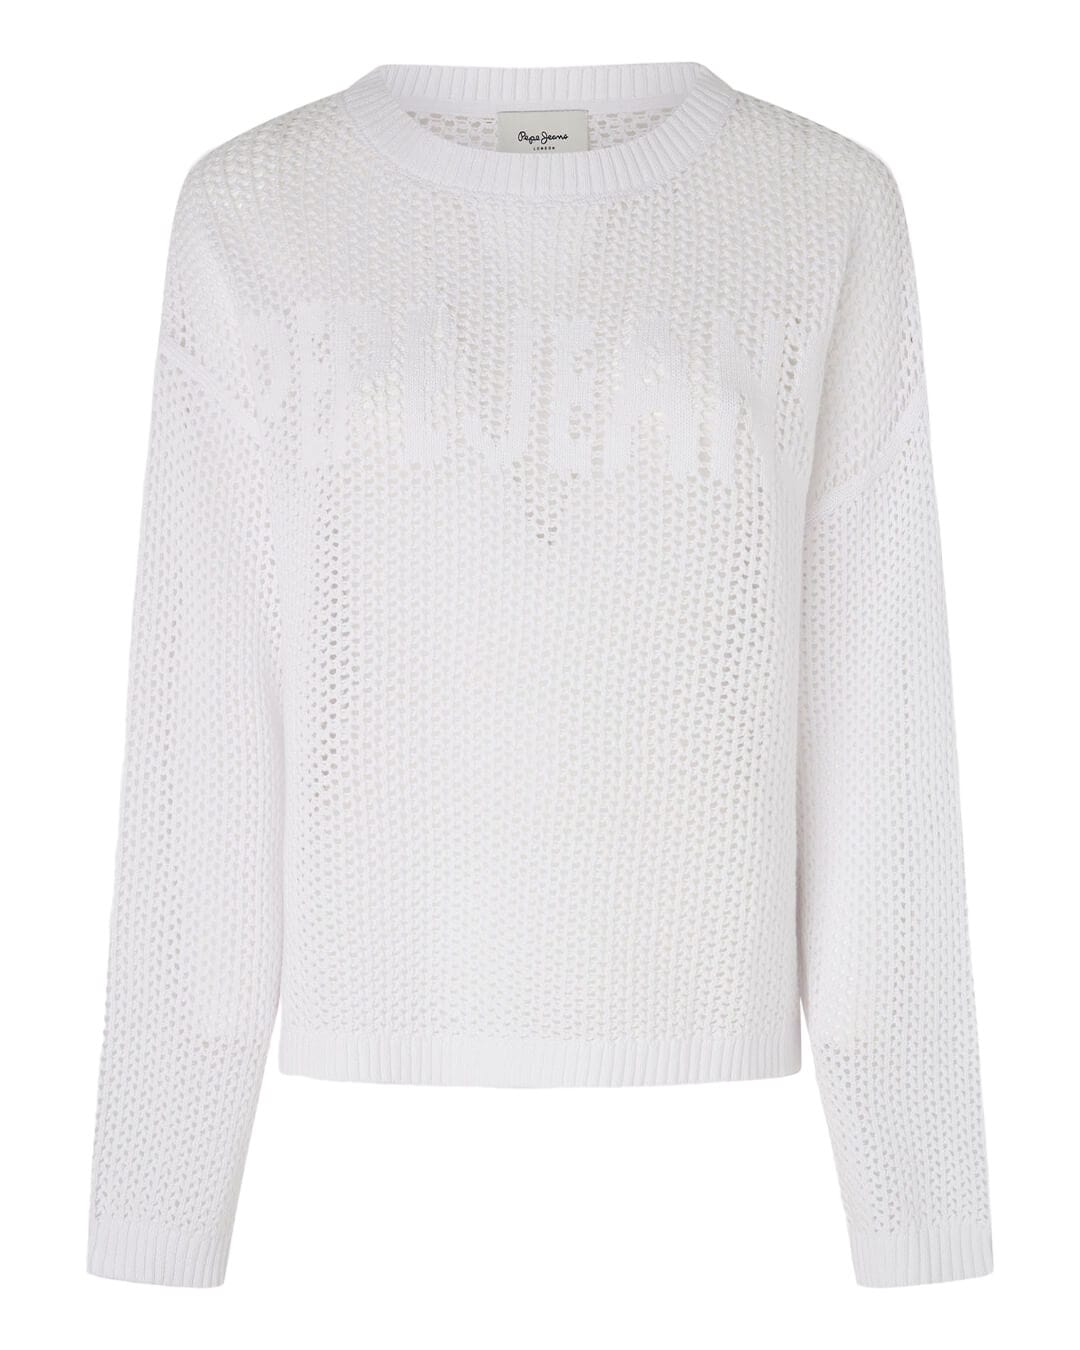 Pepe Jeans Jumpers Pepe Jeans White Relaxed Fit Jumper With Openwork Detail